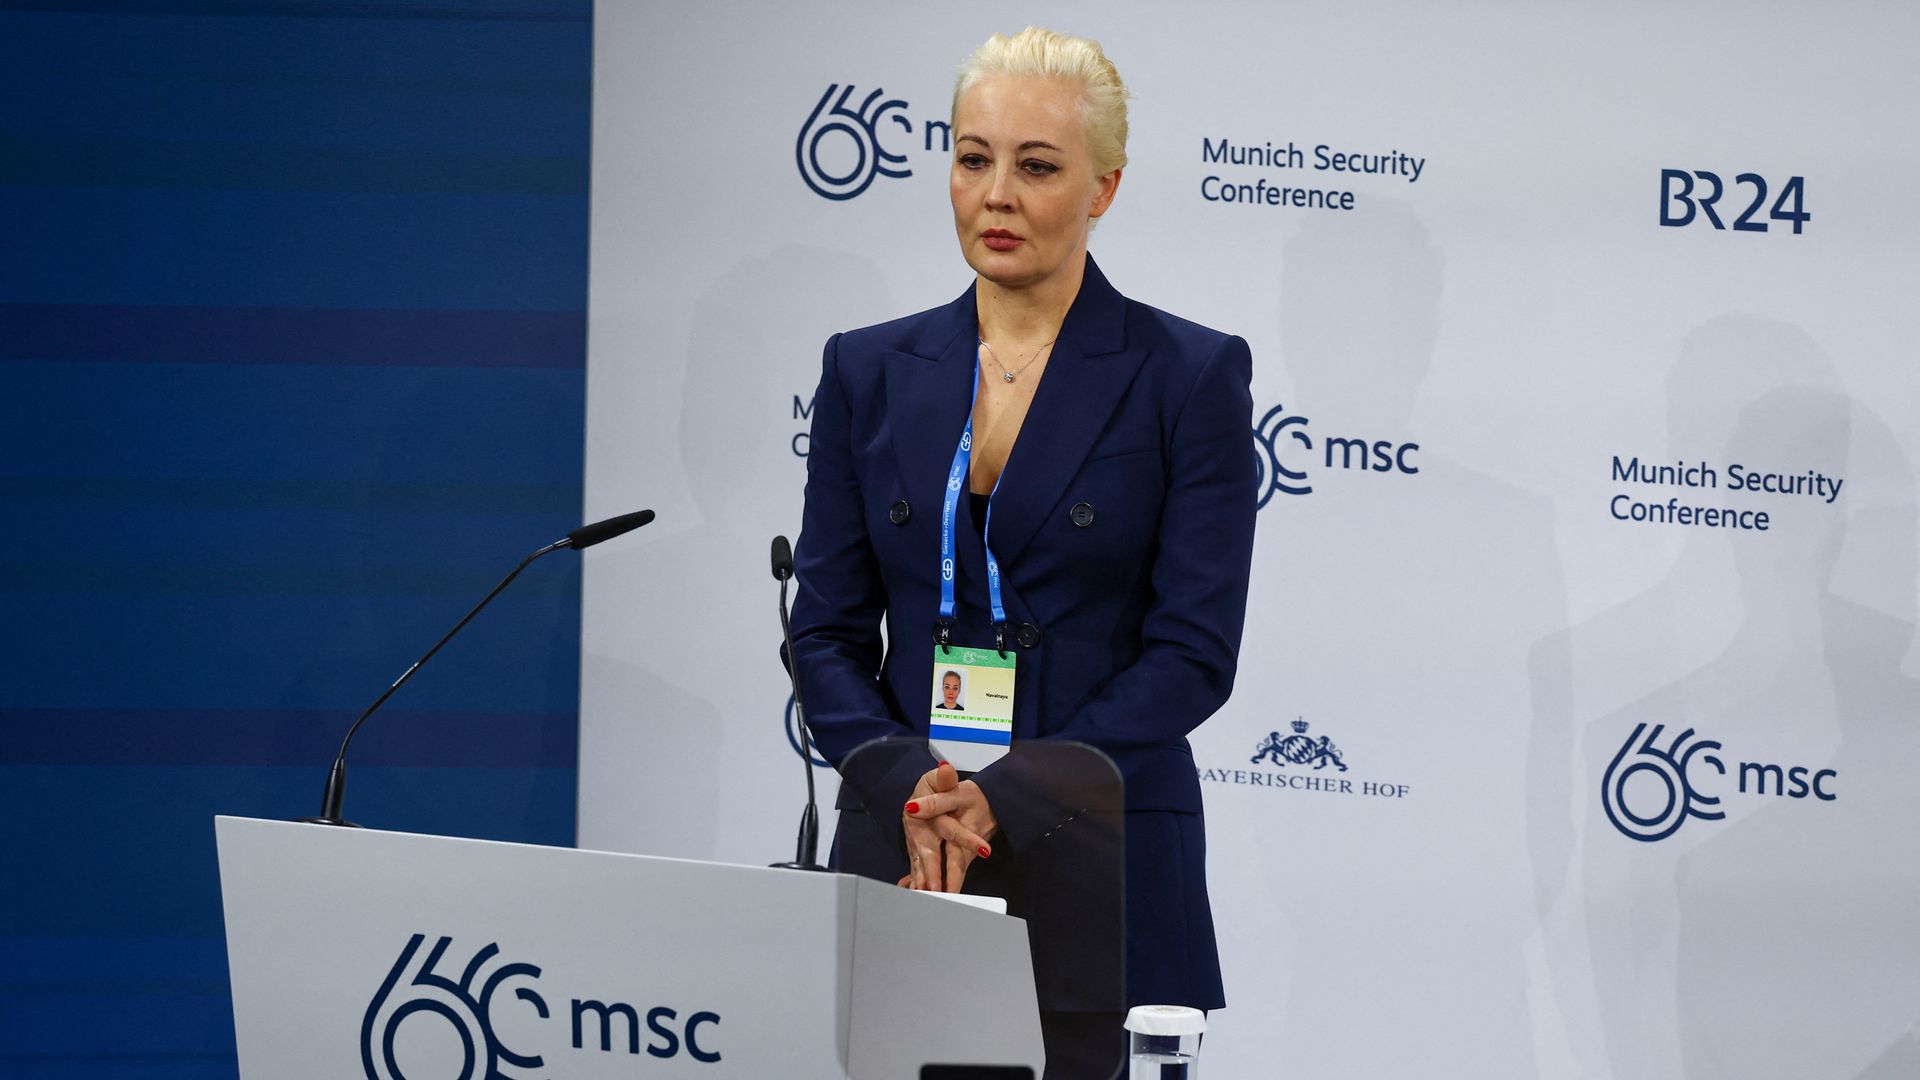 Yulia Navalnaya stands at a lectern with a serious expression